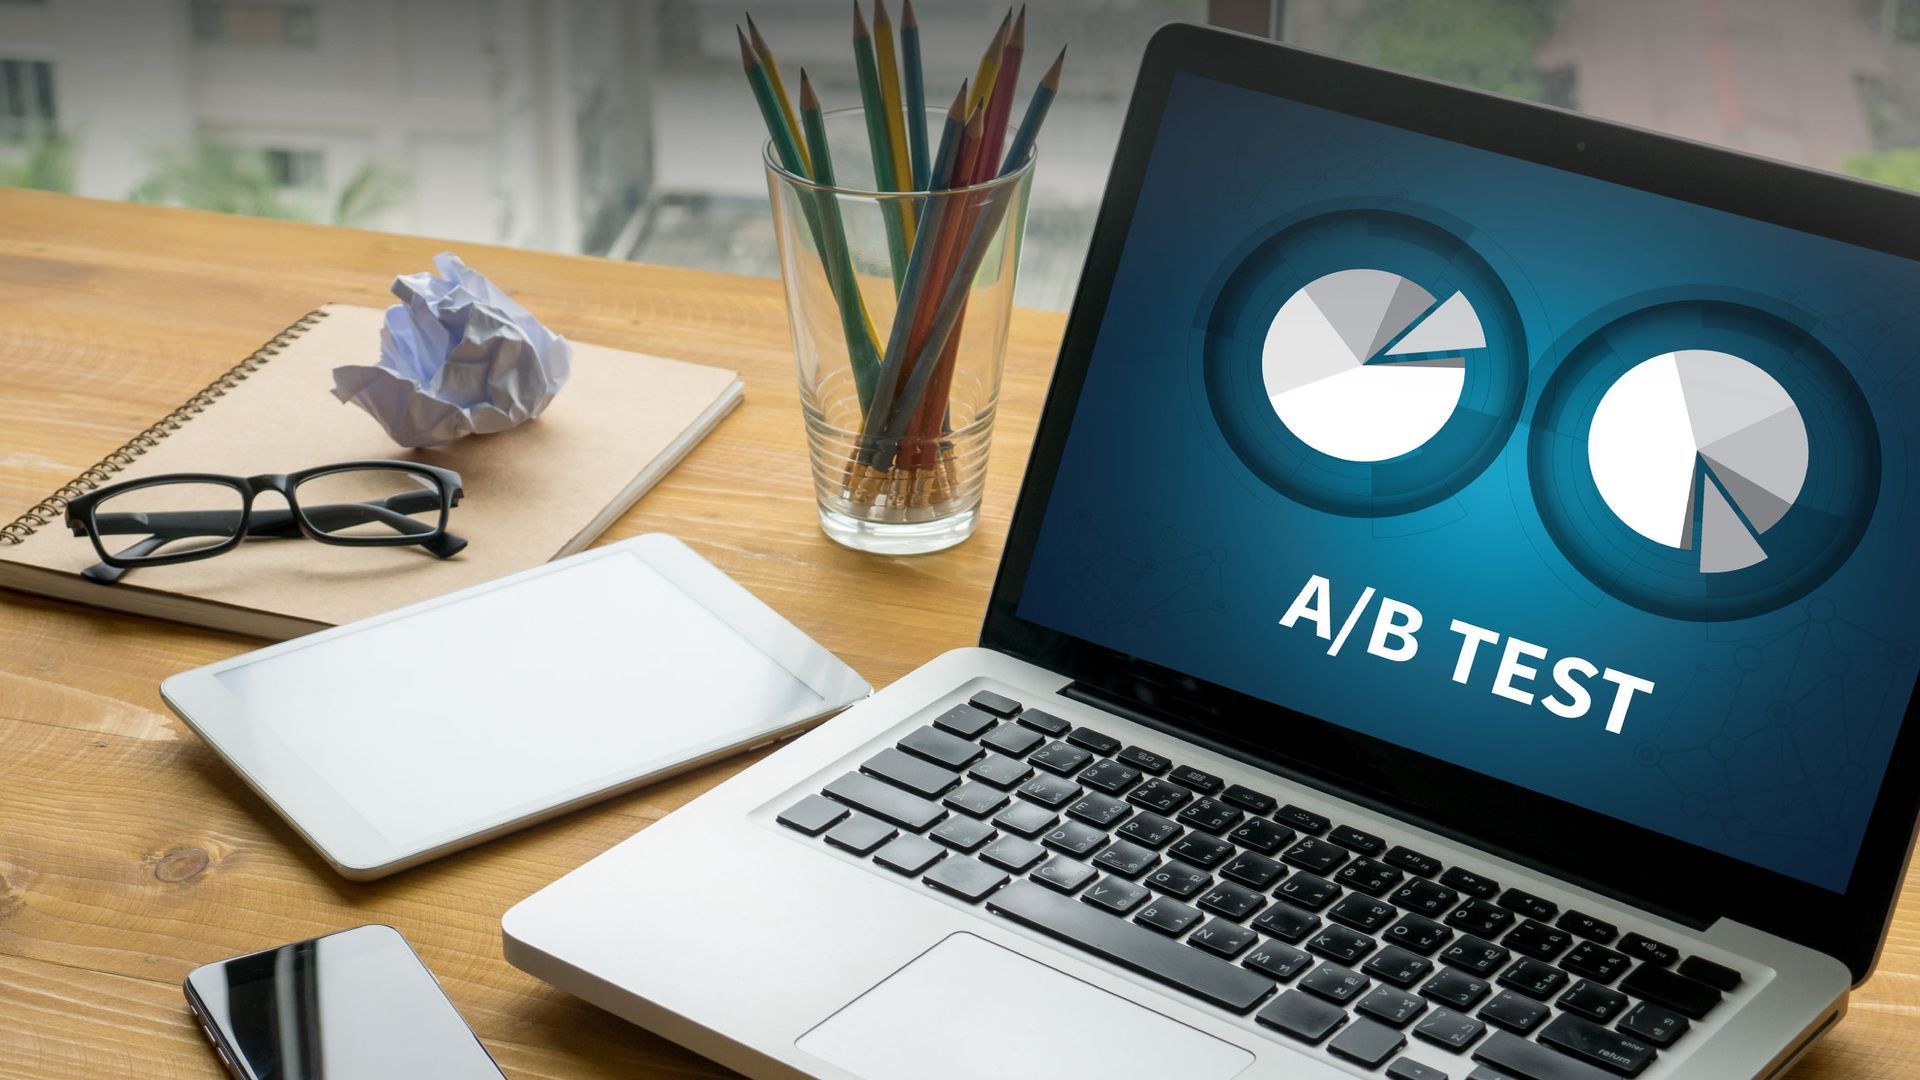 Why is A/B Testing Important in Web Design?